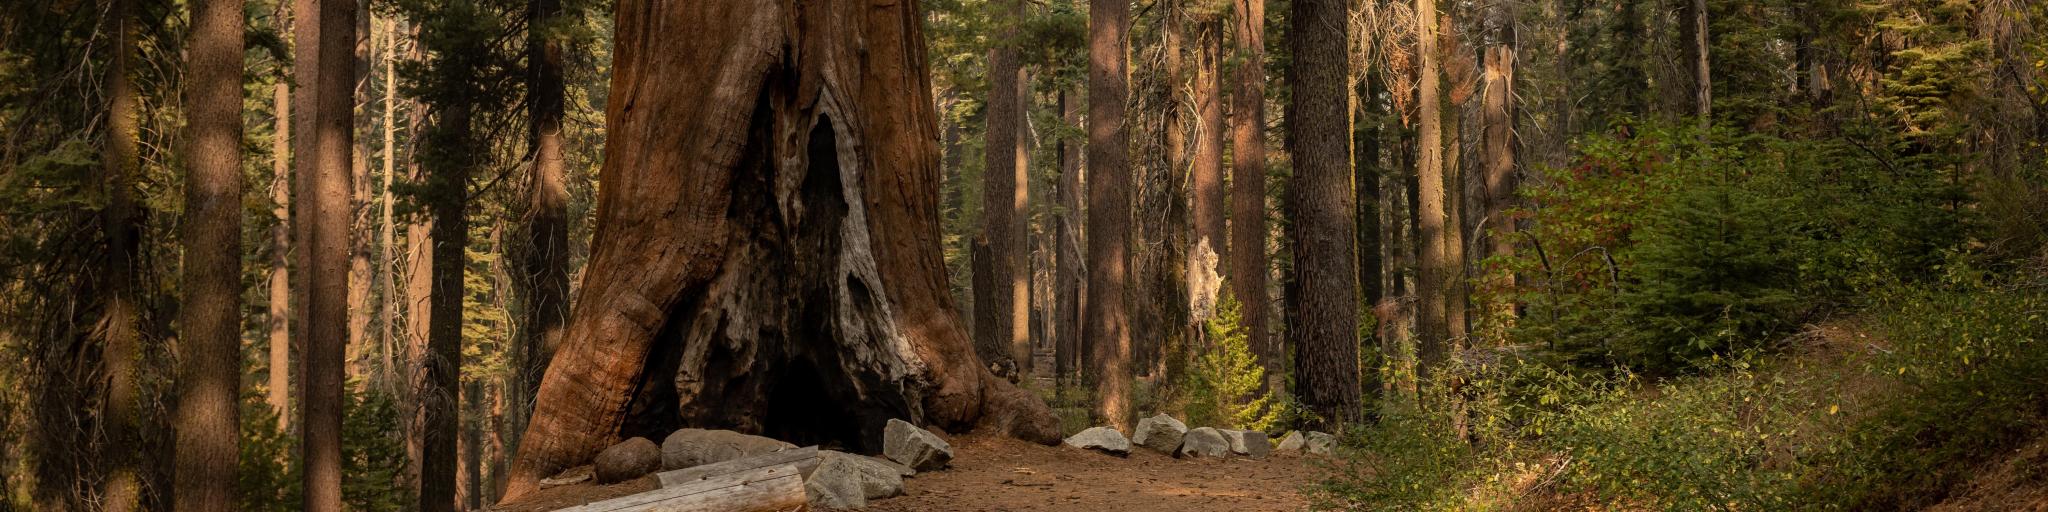 A Giant Sequoia stands tall next to trail along Tuolumne Grove Road